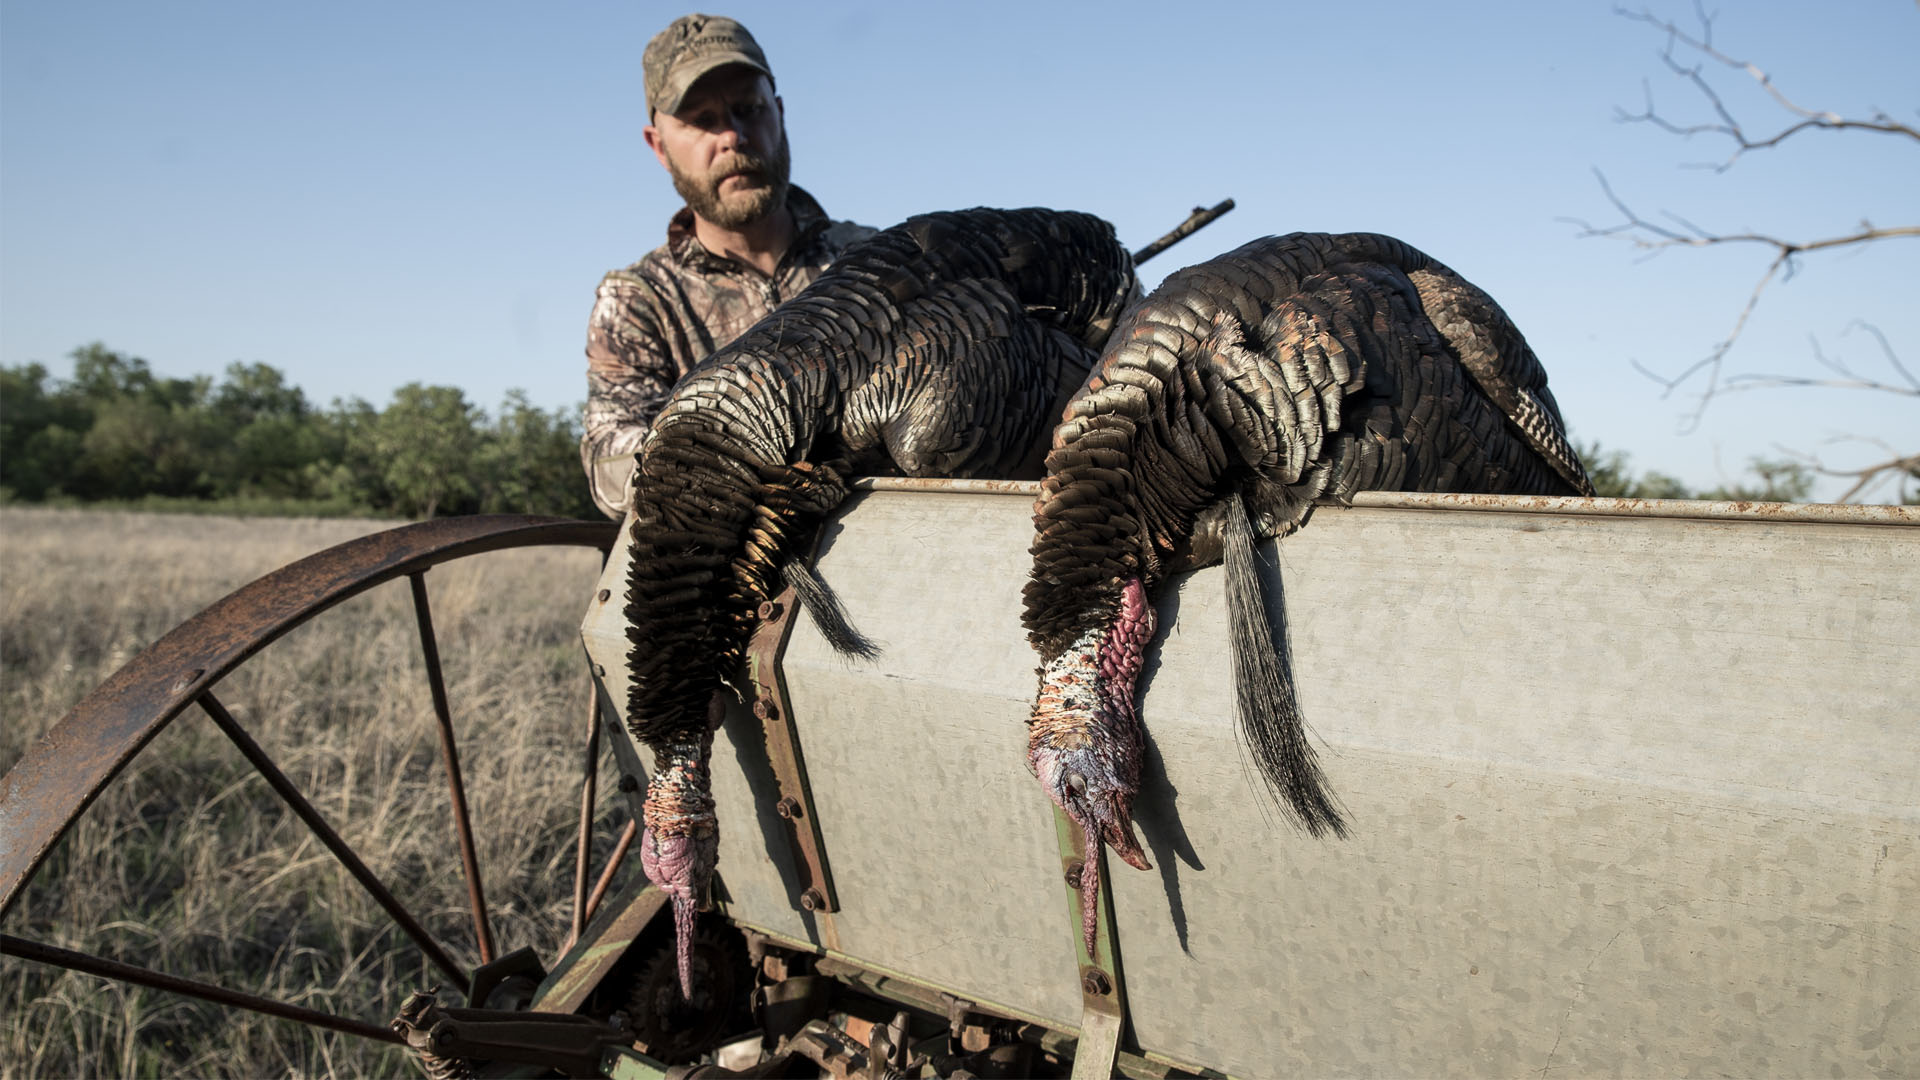 Paul Sawyer Tags Two Huge Gobblers in Midwest